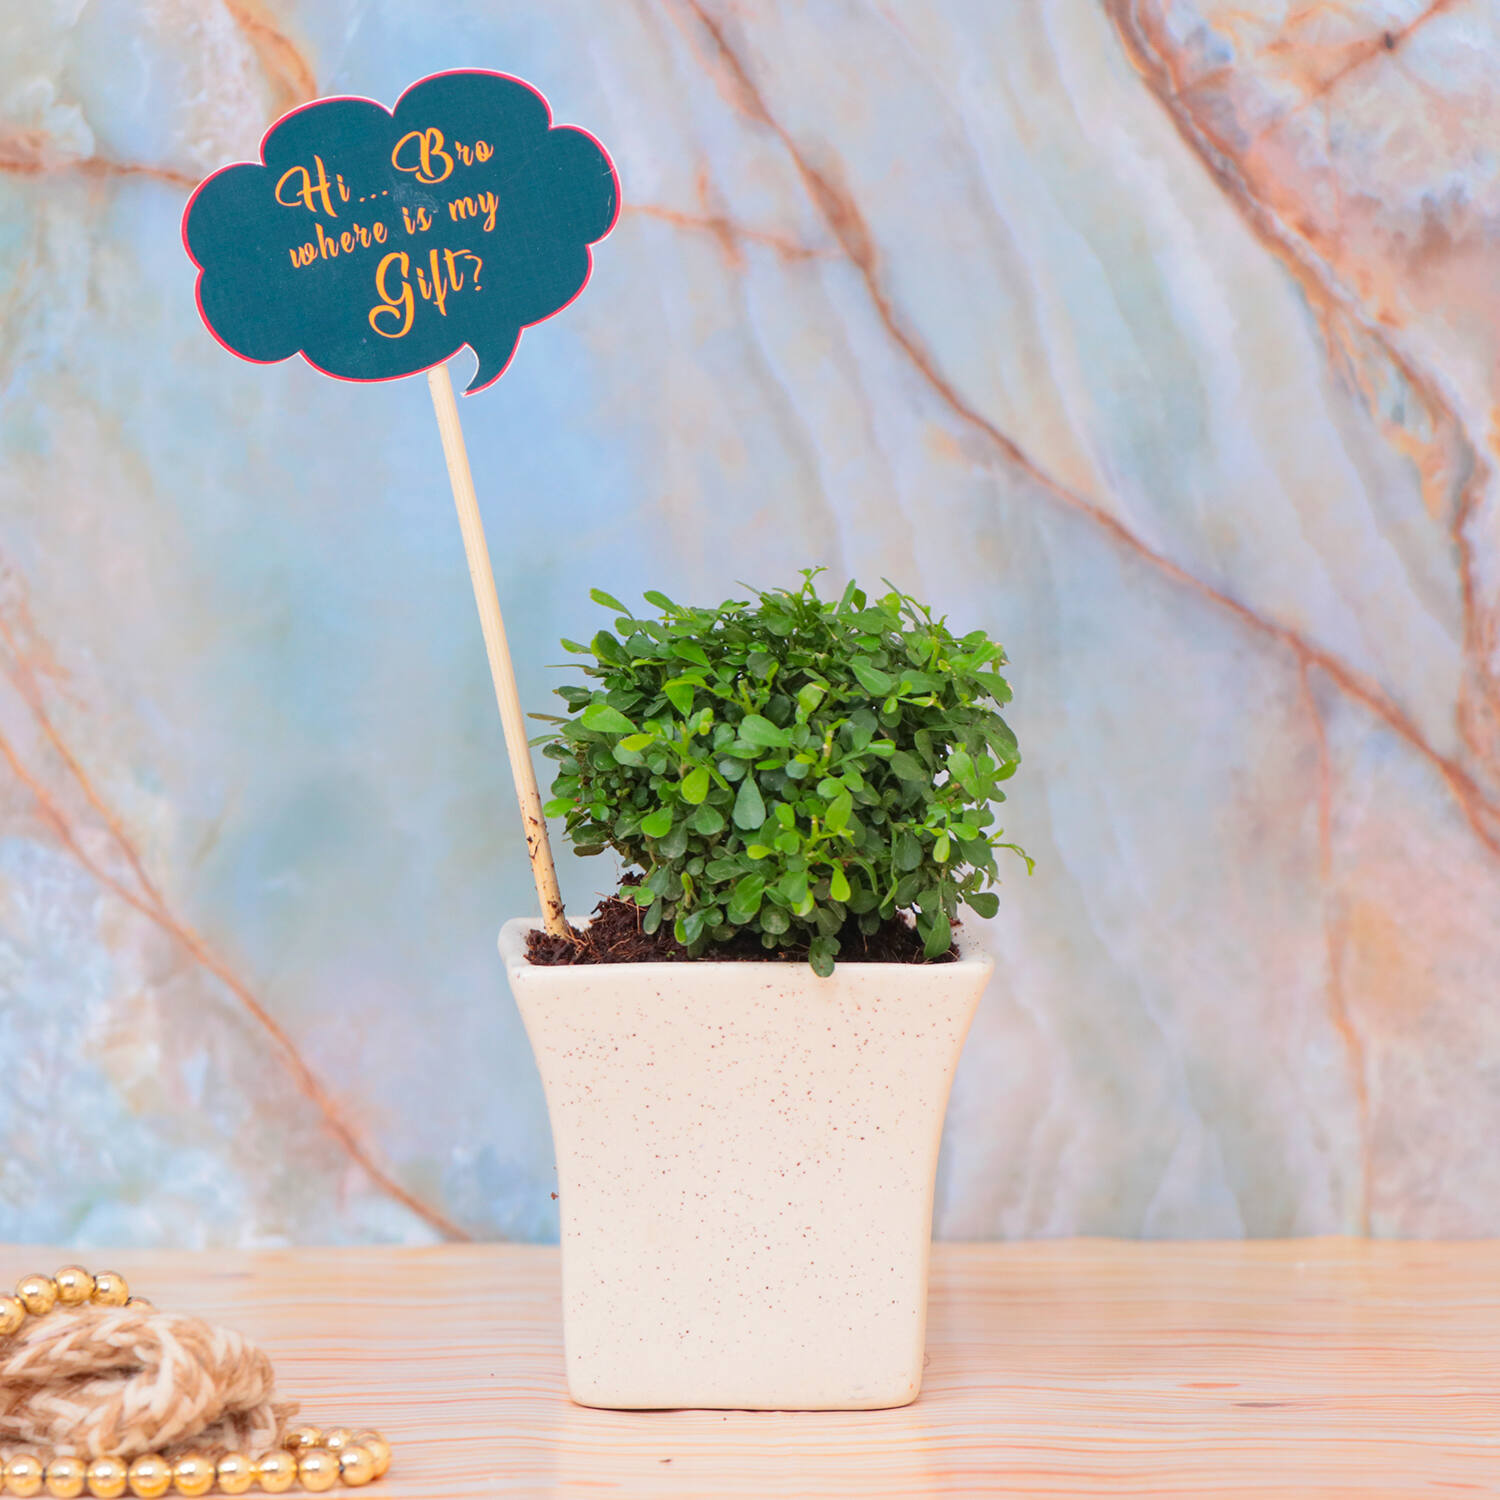 7 Last-Minute Mother's Day Gardening Gift Ideas - The Home Depot